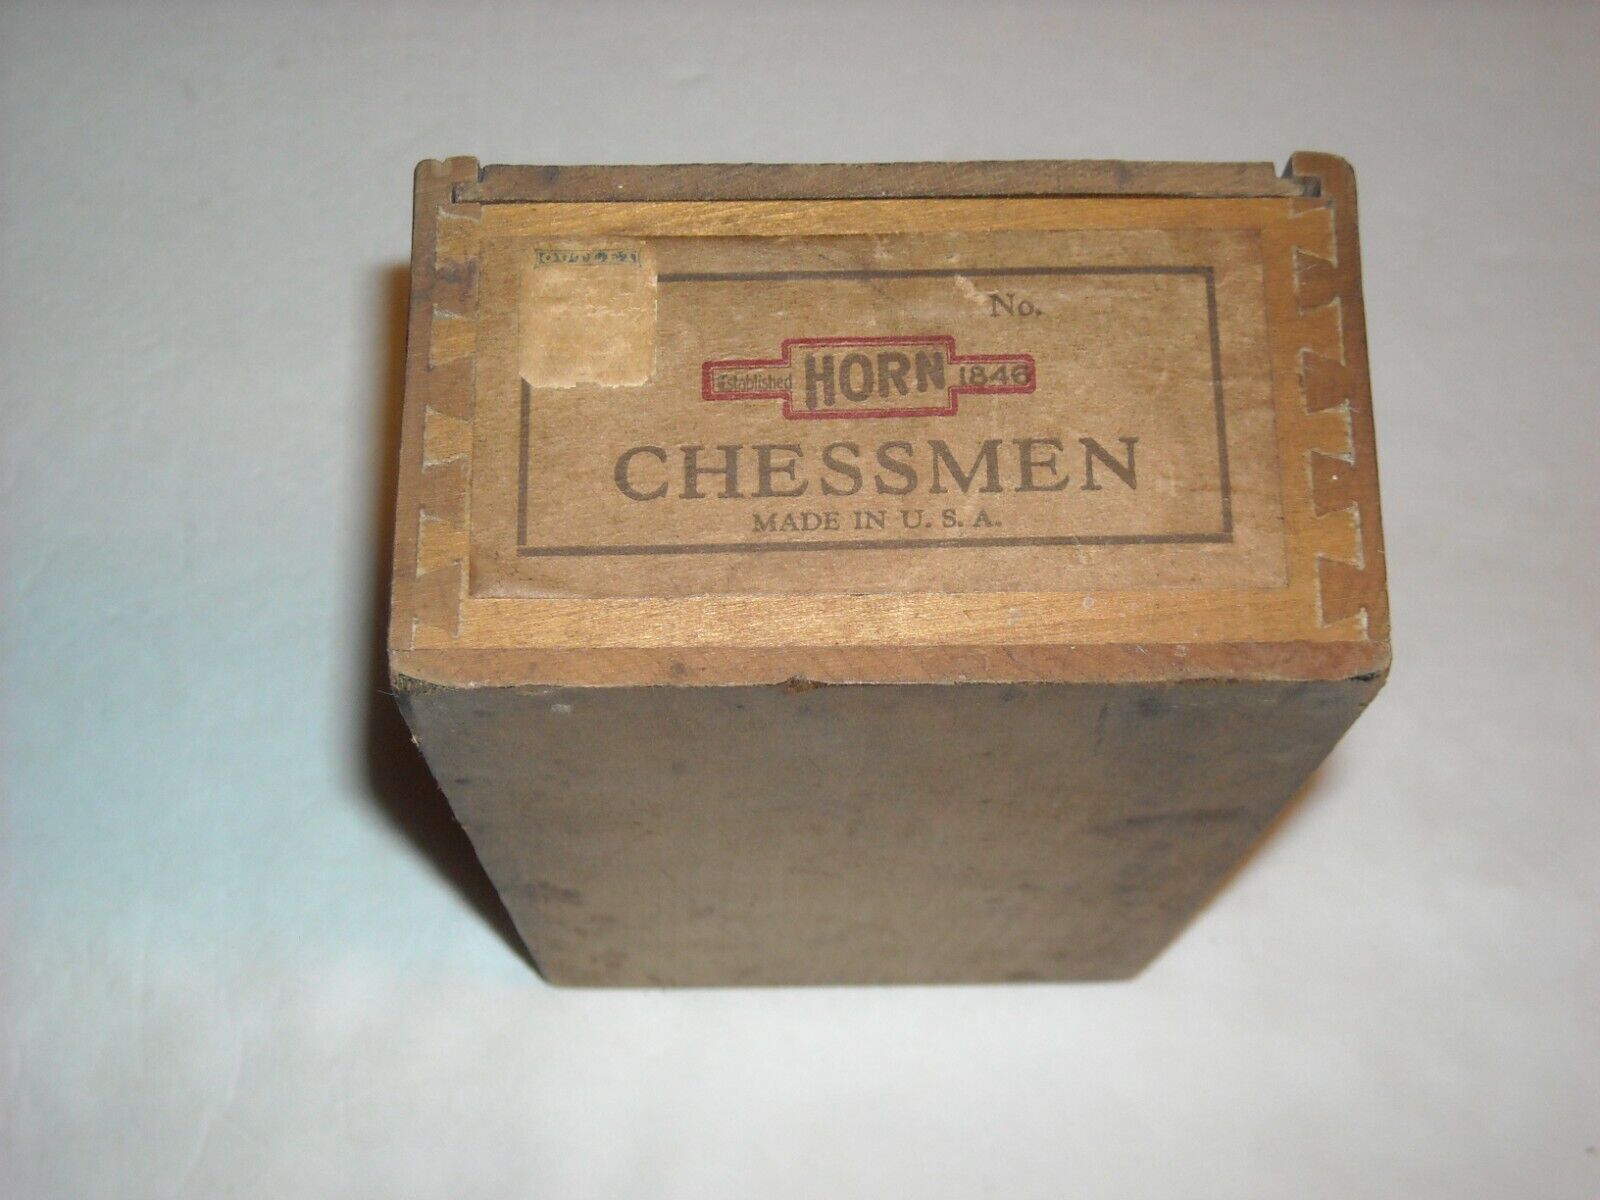 Antique Wooden Advertising Box Chessmen Box Made In U.S.A.